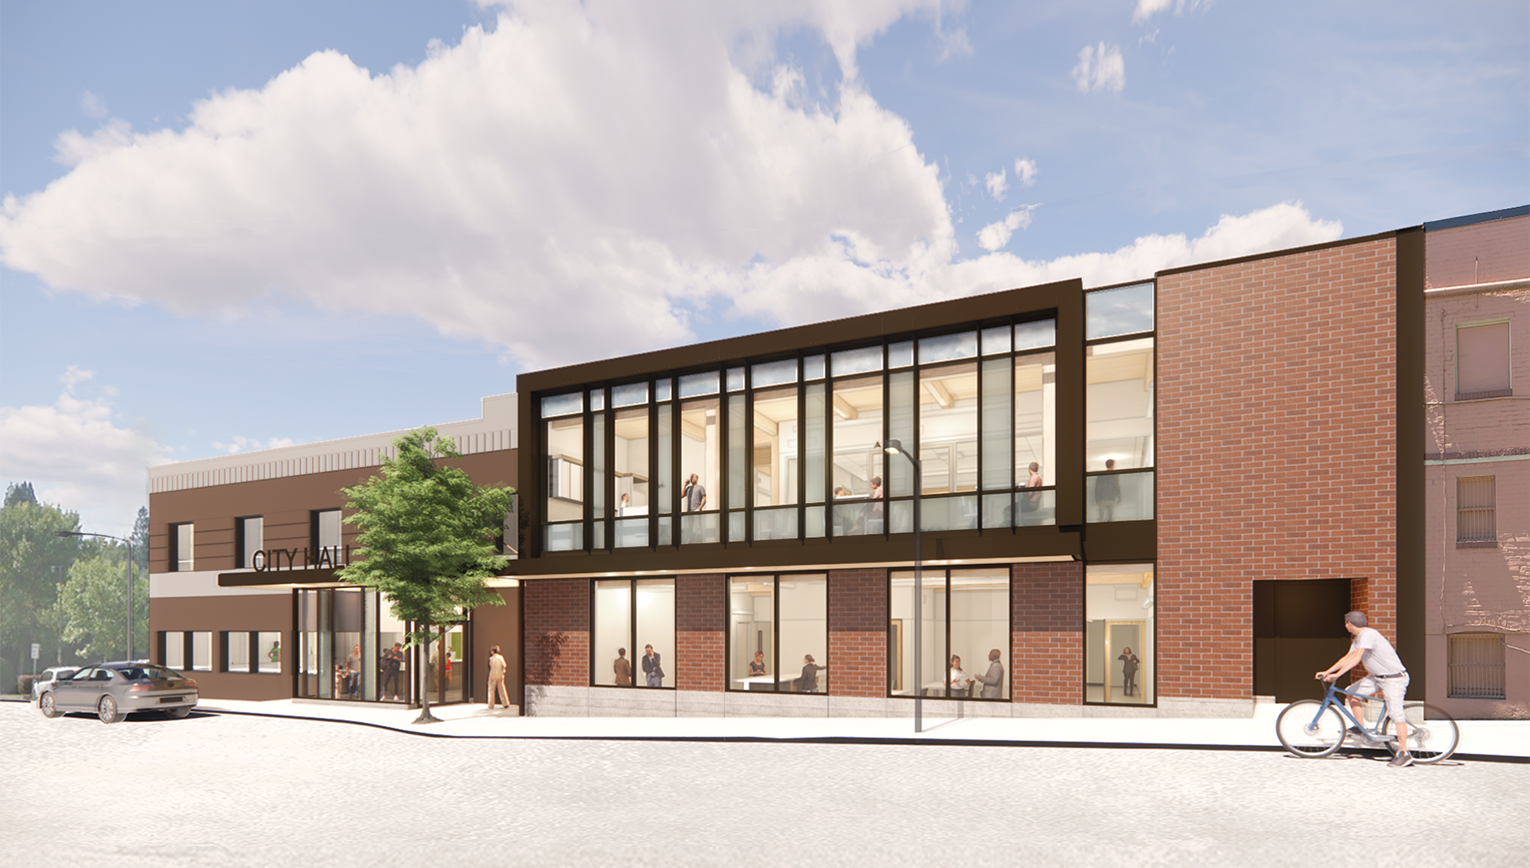 Exterior rendering of renovated and expanded Forest Grove City Hall featuring floor to ceiling windows on the second floor addition. Both the additon, as well as the original building, which can be seen in the background are clad in brick. A bicyclist is riding by on the right.